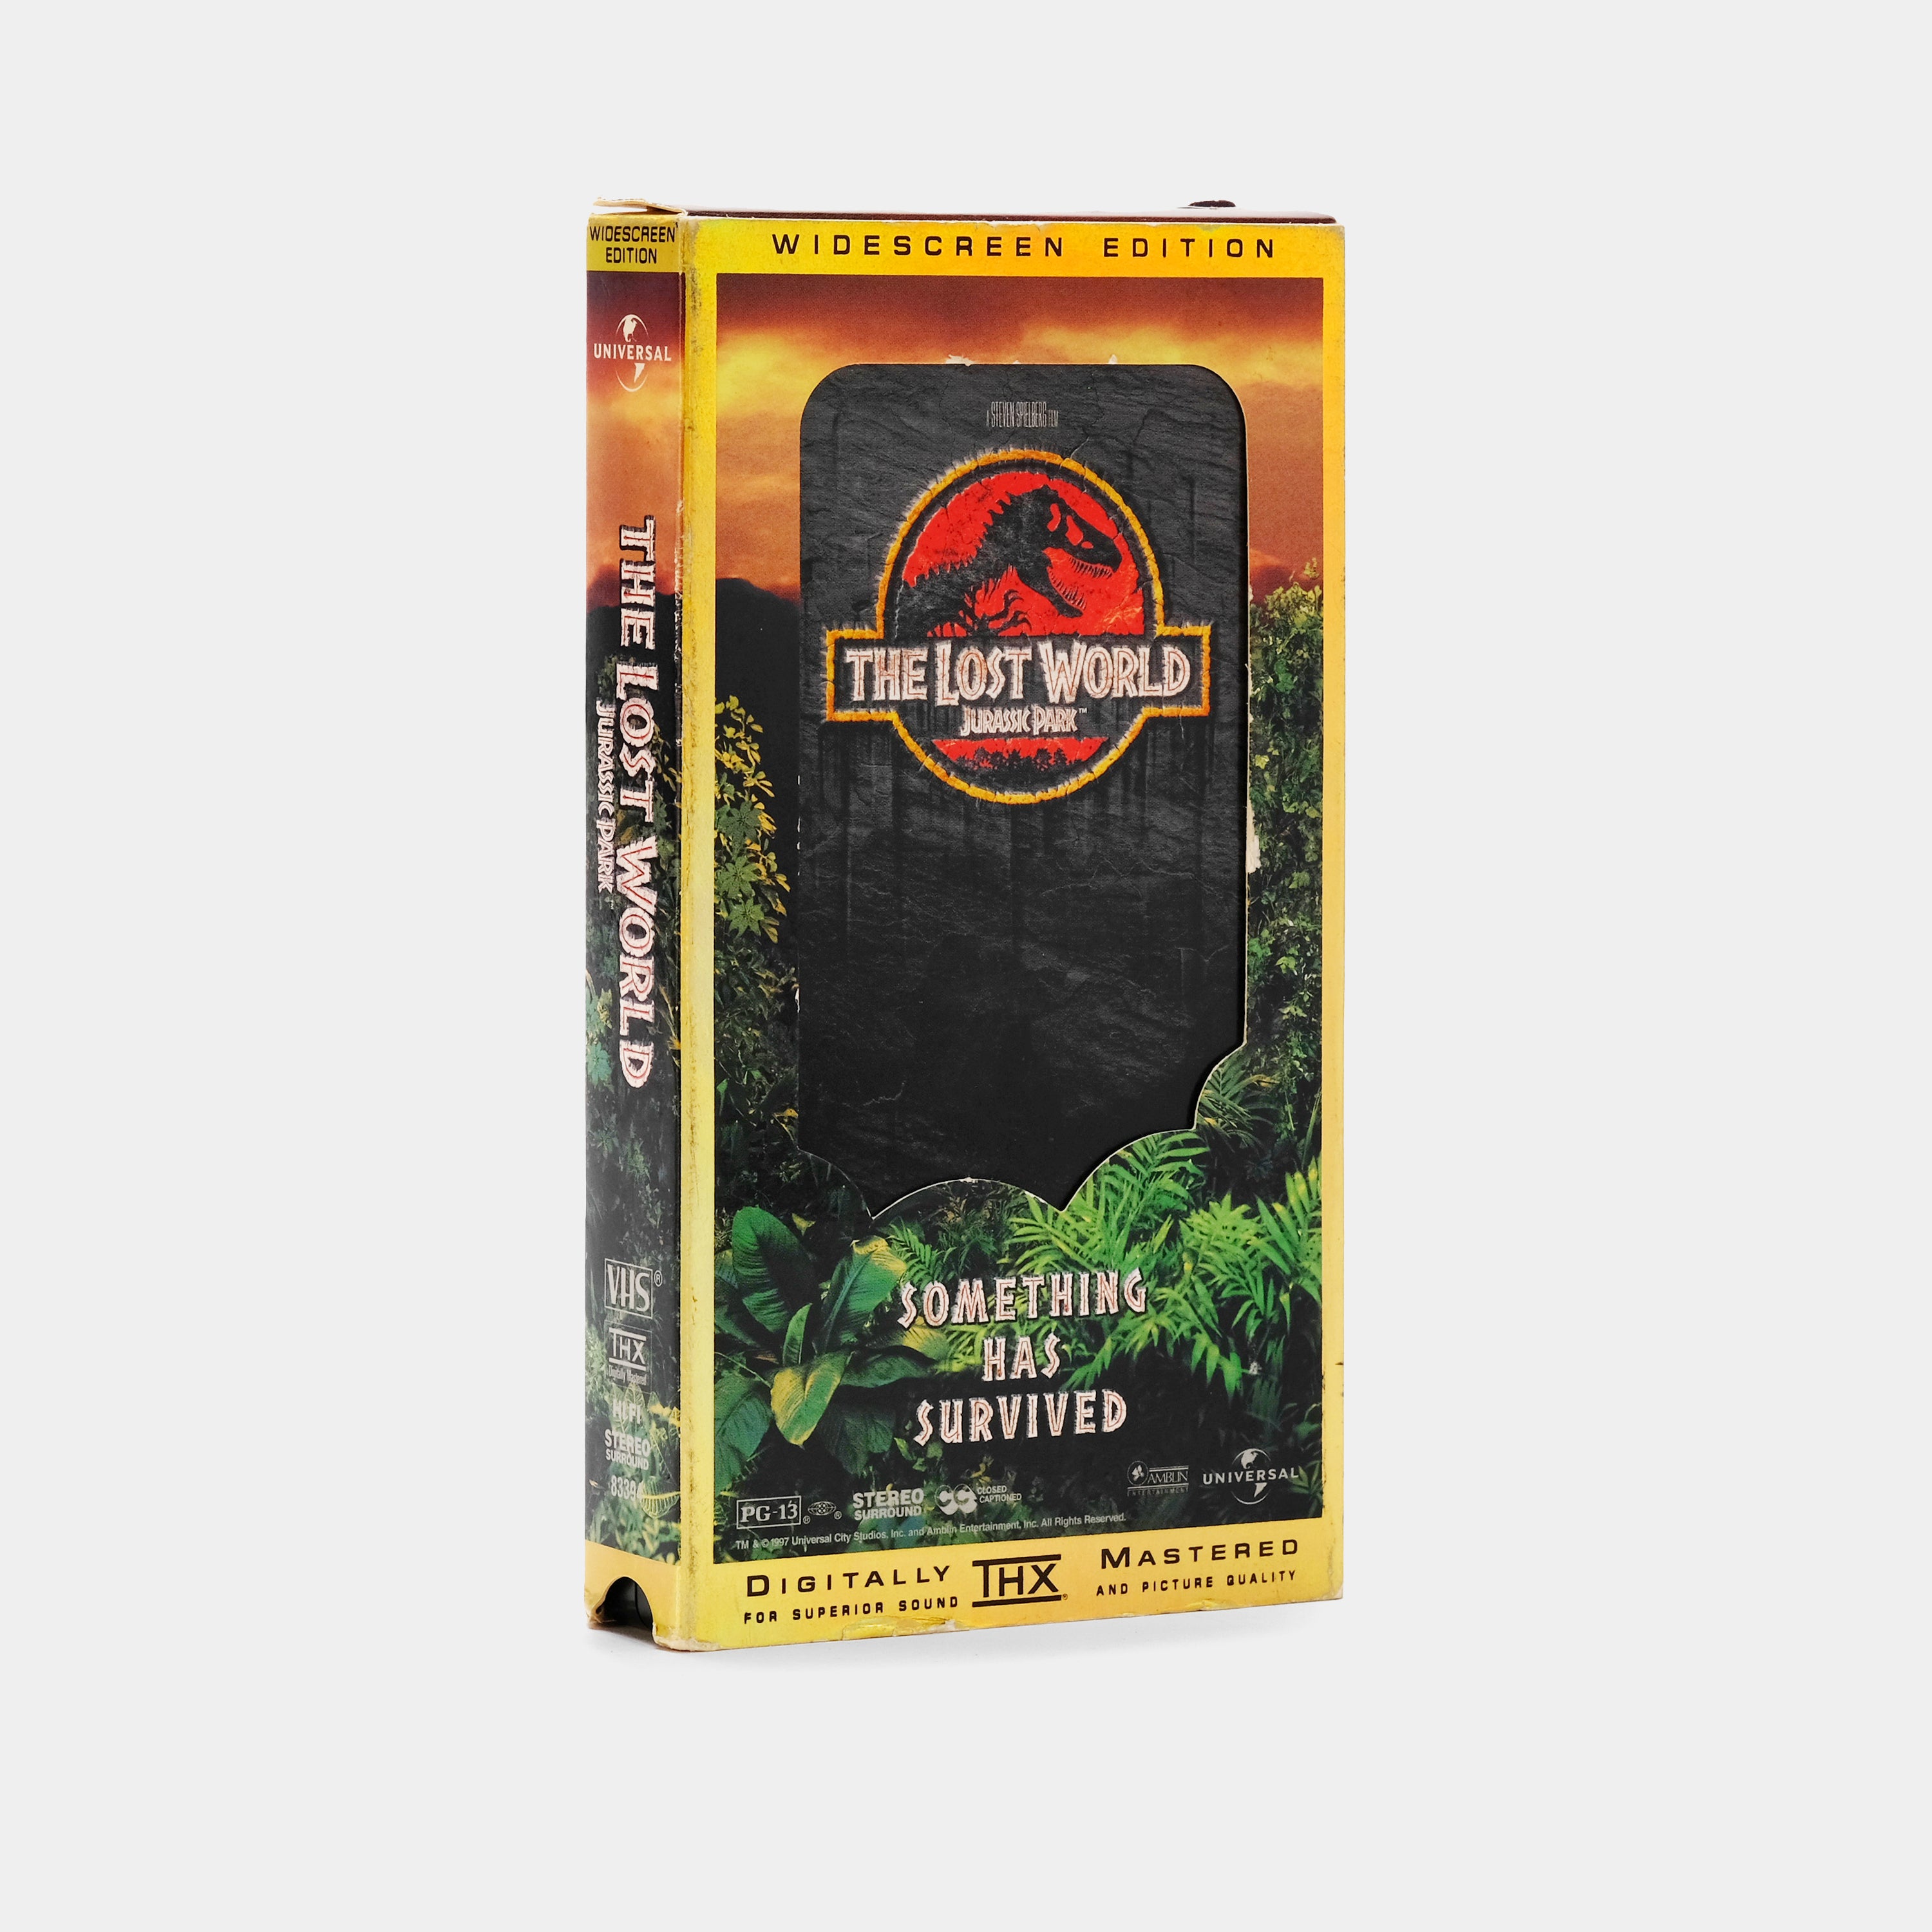 The Lost World: Jurassic Park (Widescreen Edition) VHS Tape